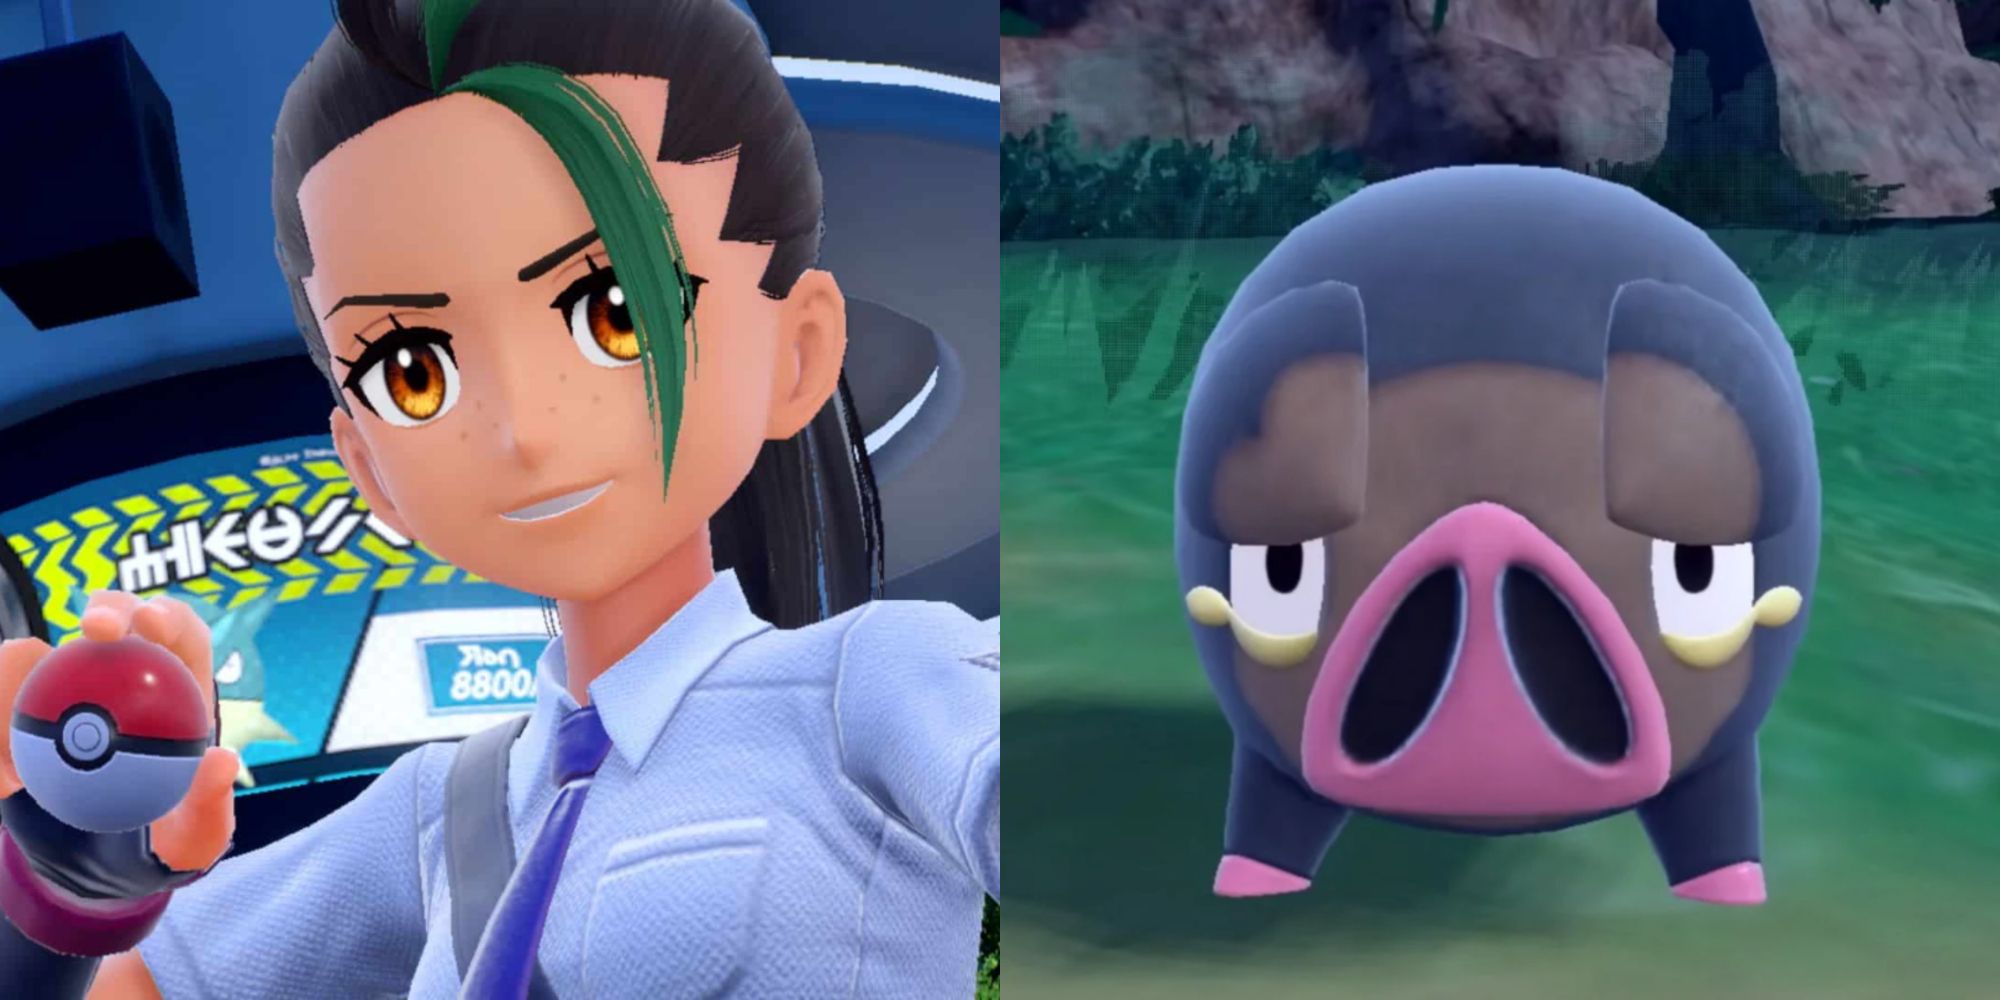 New Pokémon Scarlet And Violet Trailer Shows Off New Pokémon, School  Rivalries, Gym Leaders, And More - Game Informer